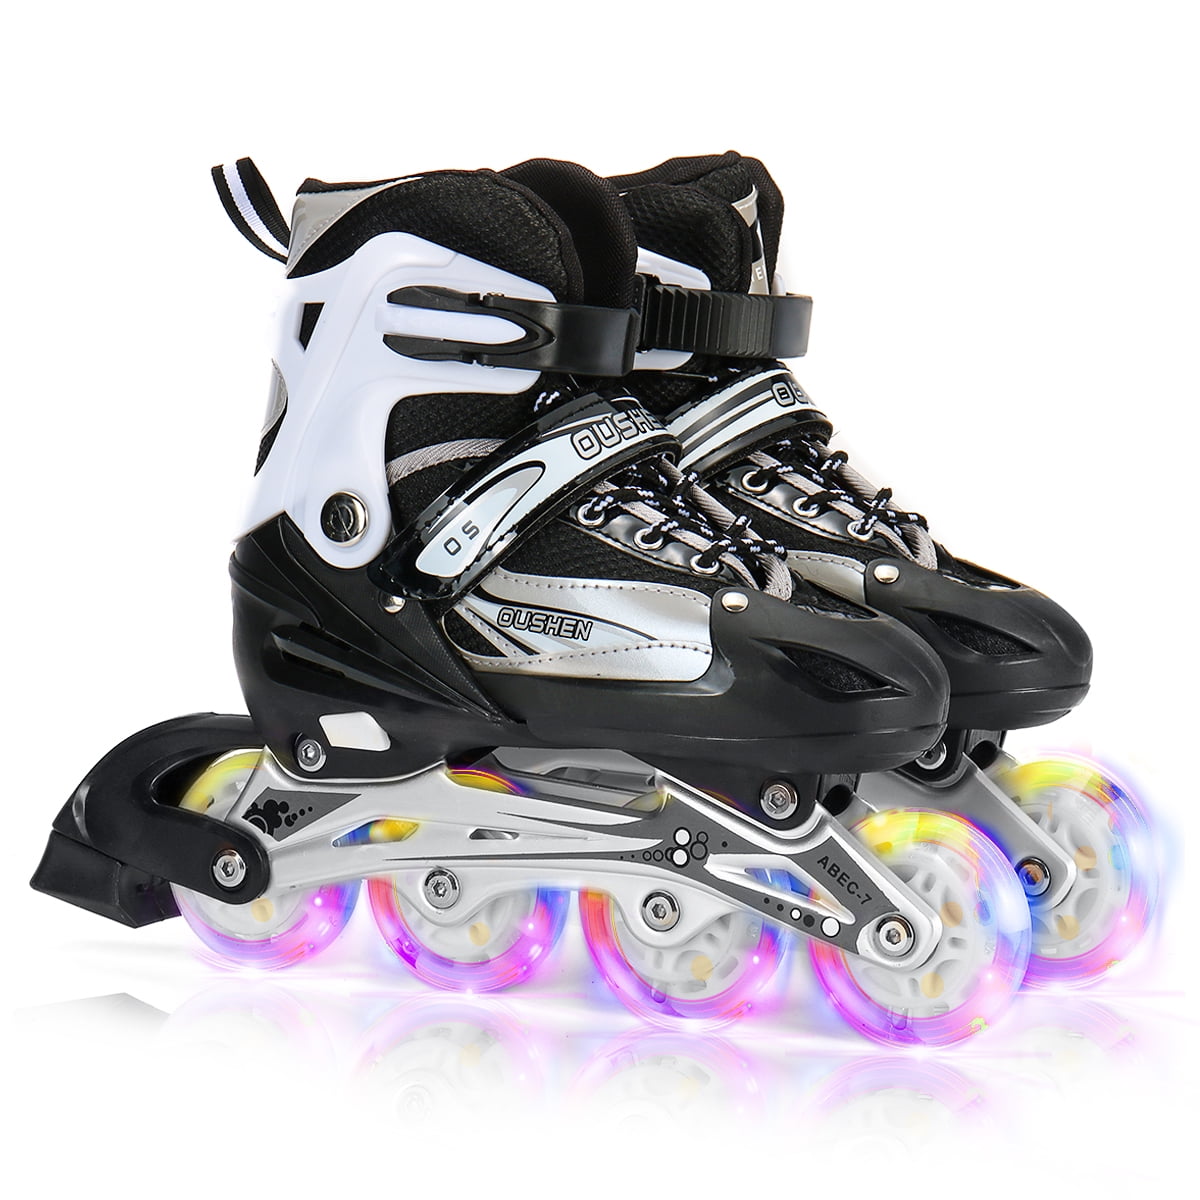 Youth and Women Nattork Adjustable Inline Skates for Kids and Adults with Light Up Wheels,Beginner Skates Fun Illuminating Outdoor Blades for Girls and Boys 